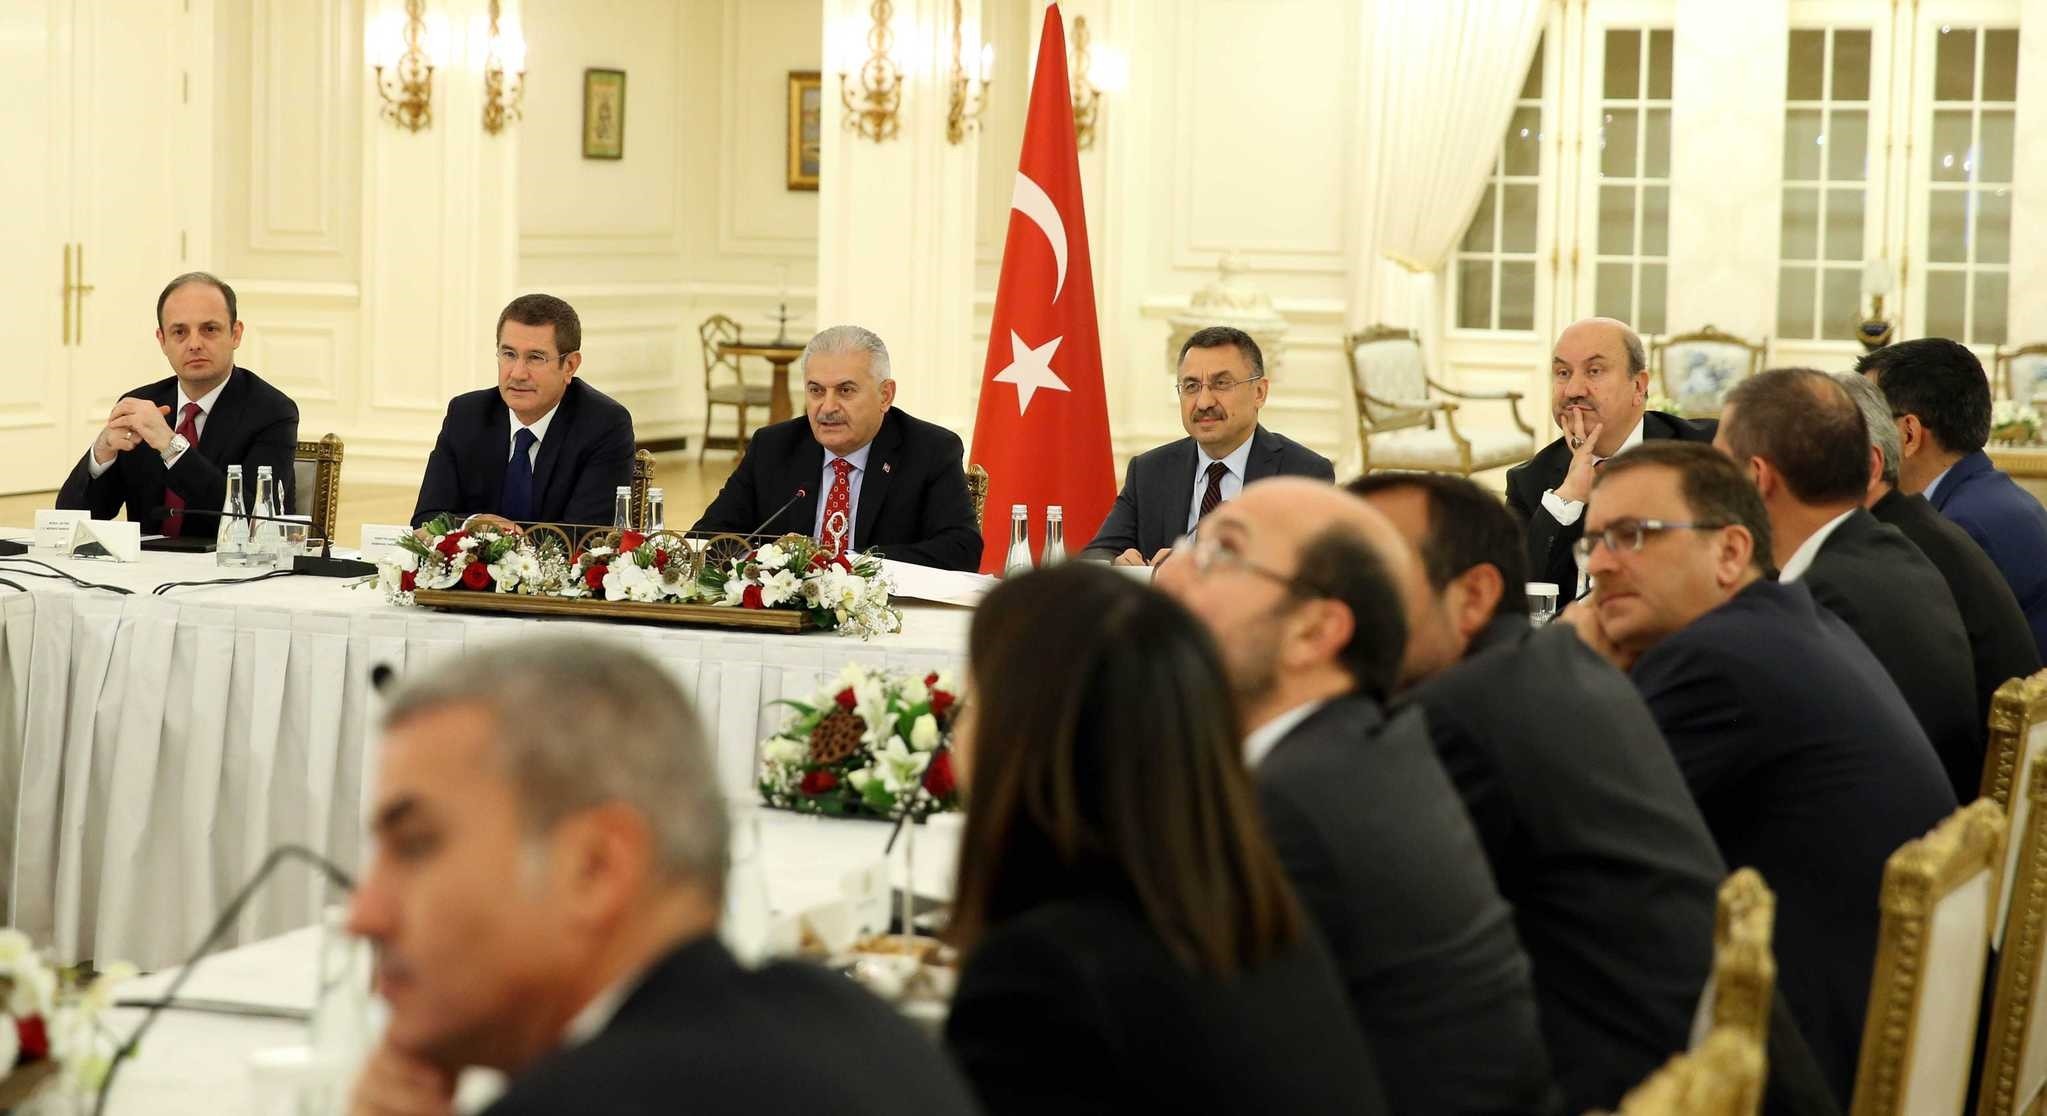 Prime Minister Yu0131ldu0131ru0131m held a special meeting with the heads of Turkish banks late Tuesday.